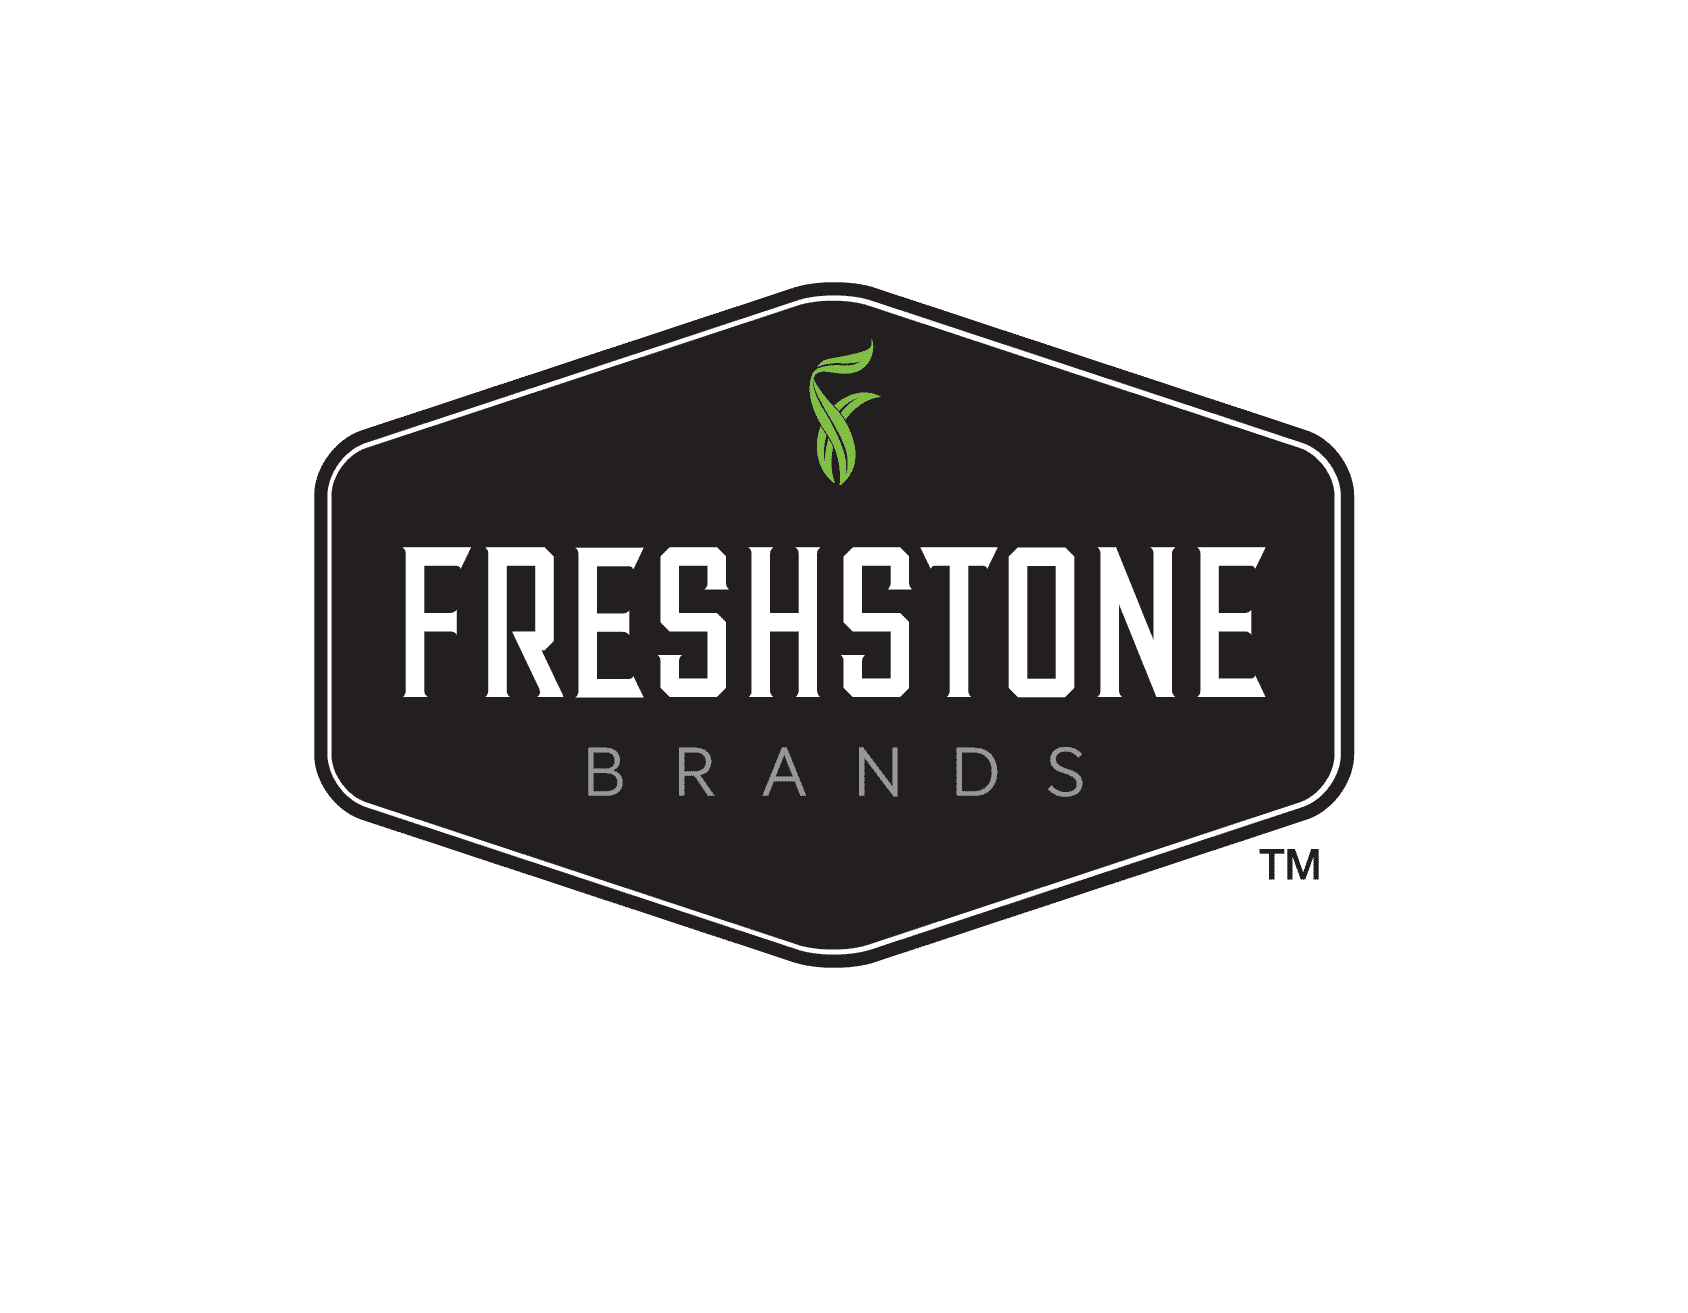 Freshstone Brands Logo. Black with white keyline and letters, Green F